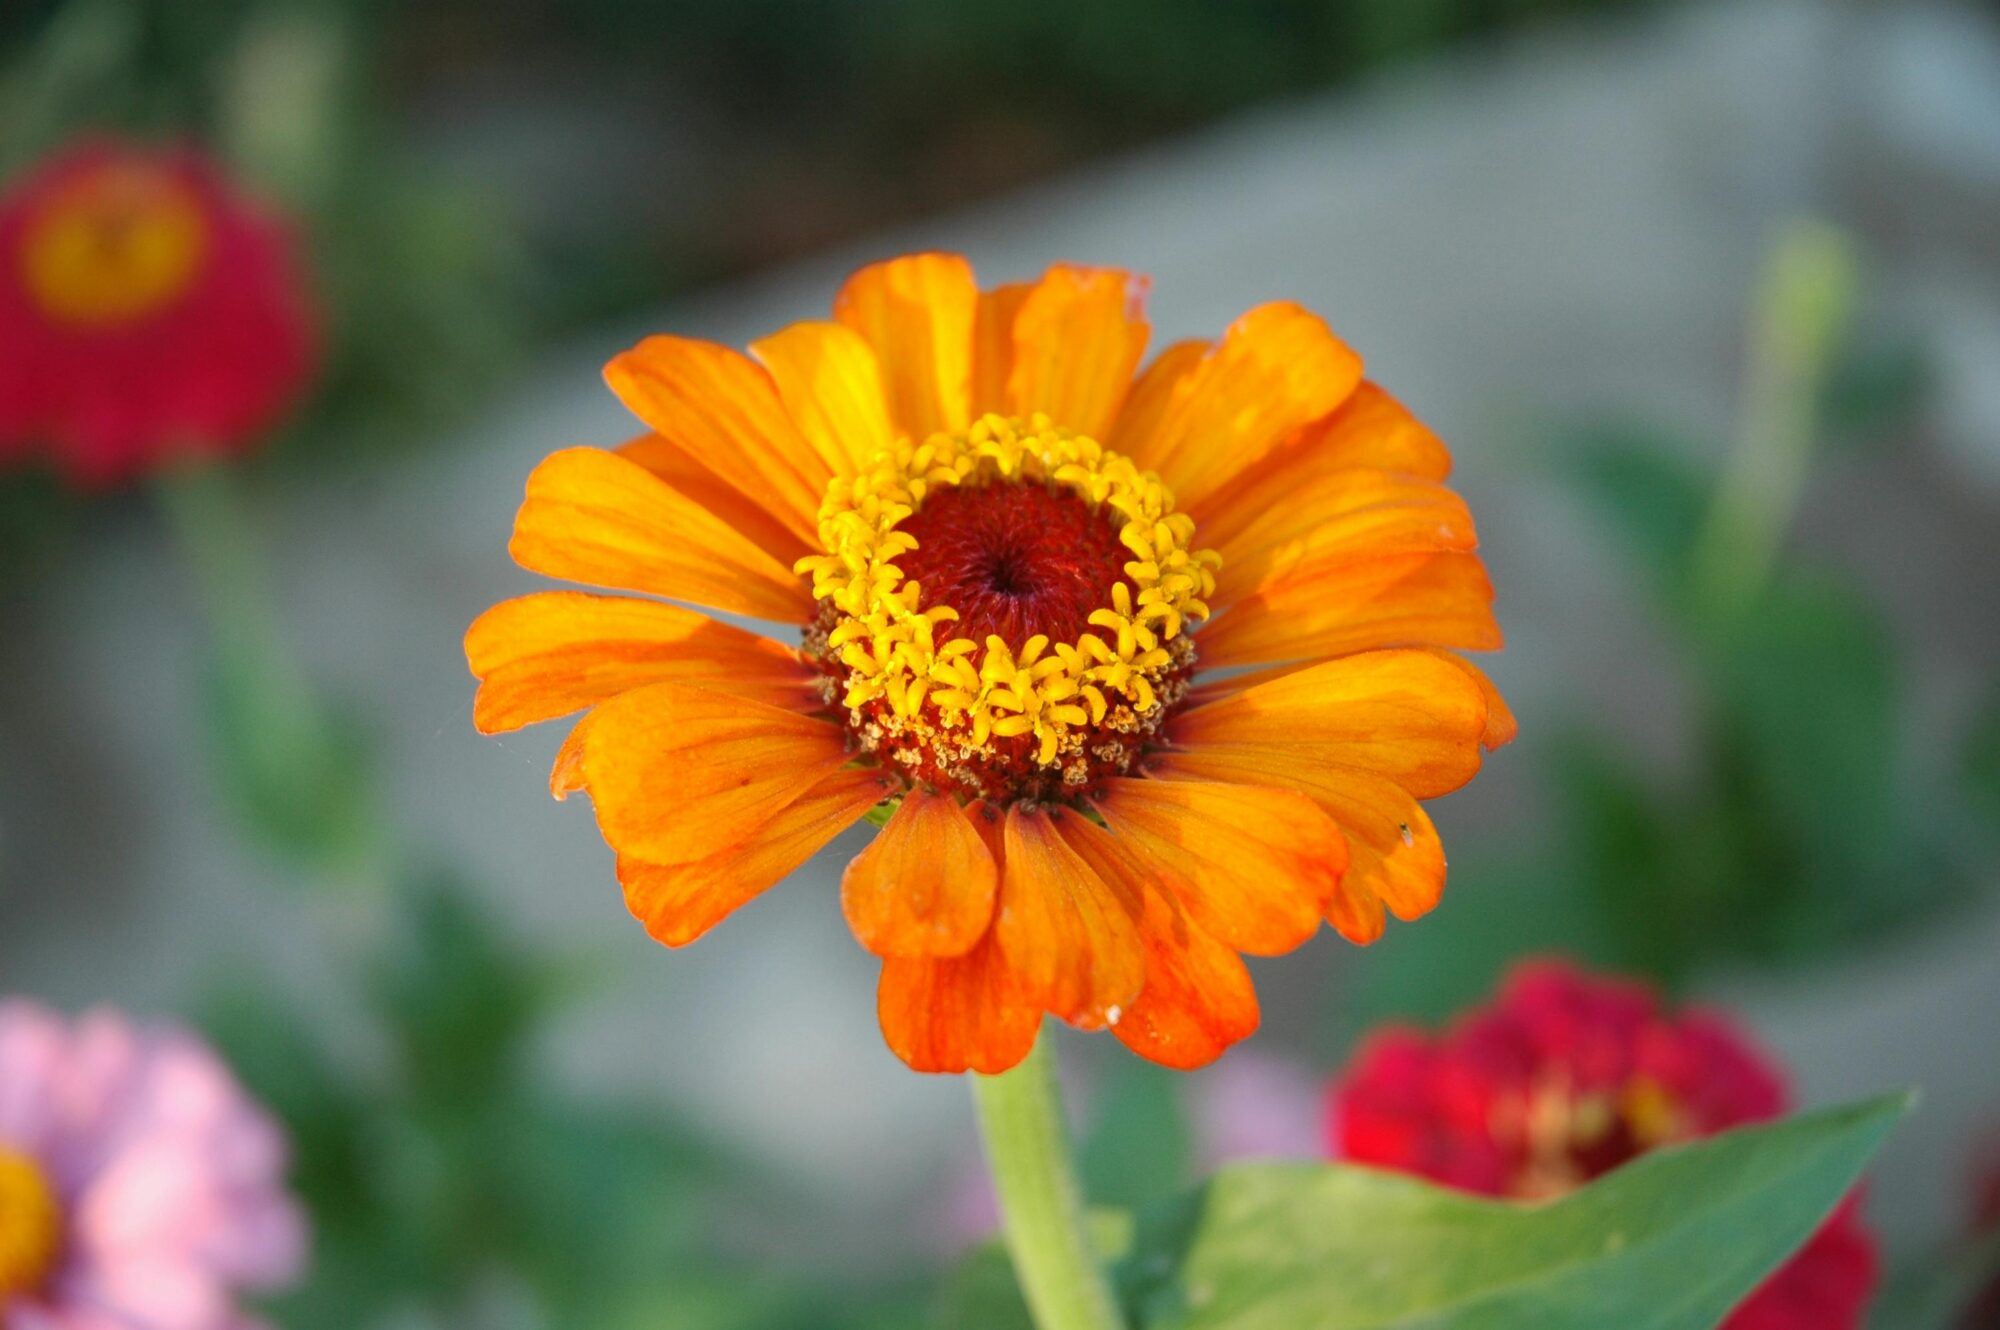 A close-up of an orange zinnia with a rich red center and dense yellow stamens, set against a soft-focus garden backdrop.